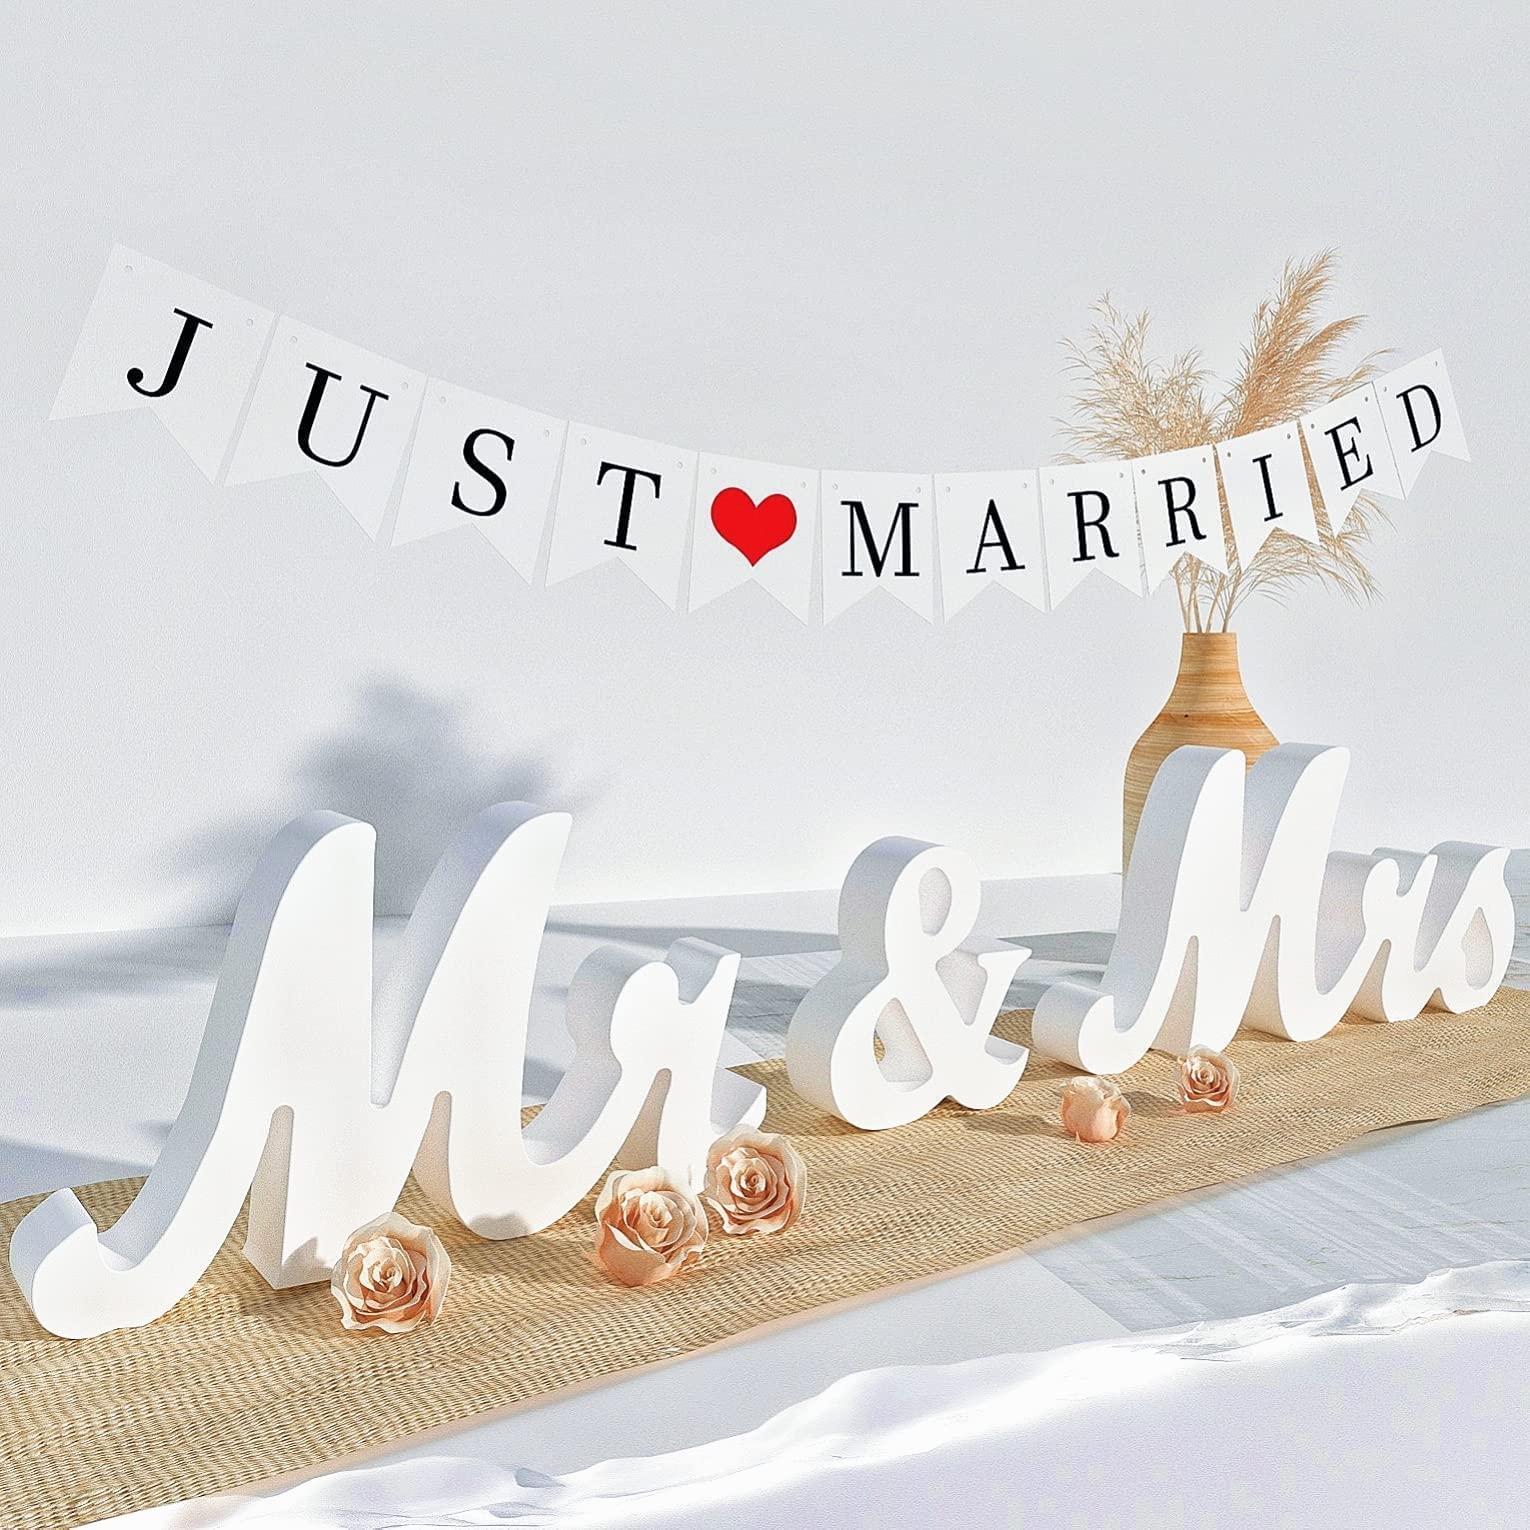 Just married banner & Mr & Mrs sign